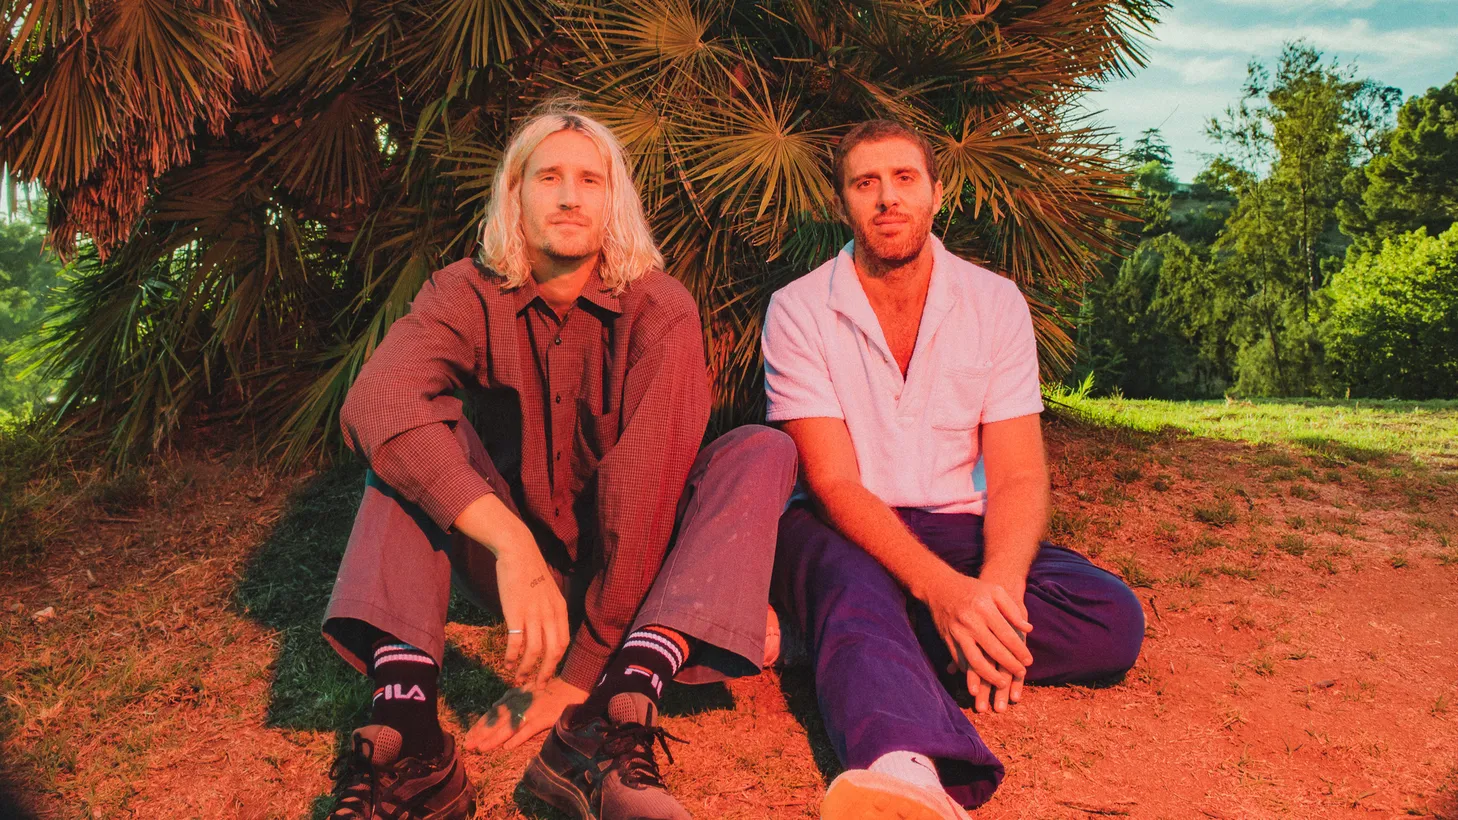 KCRW DJs are spinning a ton of tracks off LA duo Neil Frances’ debut album “There Is No Neil Frances,” and why shouldn’t they? Check out “Dancing” with its retro-forward style.